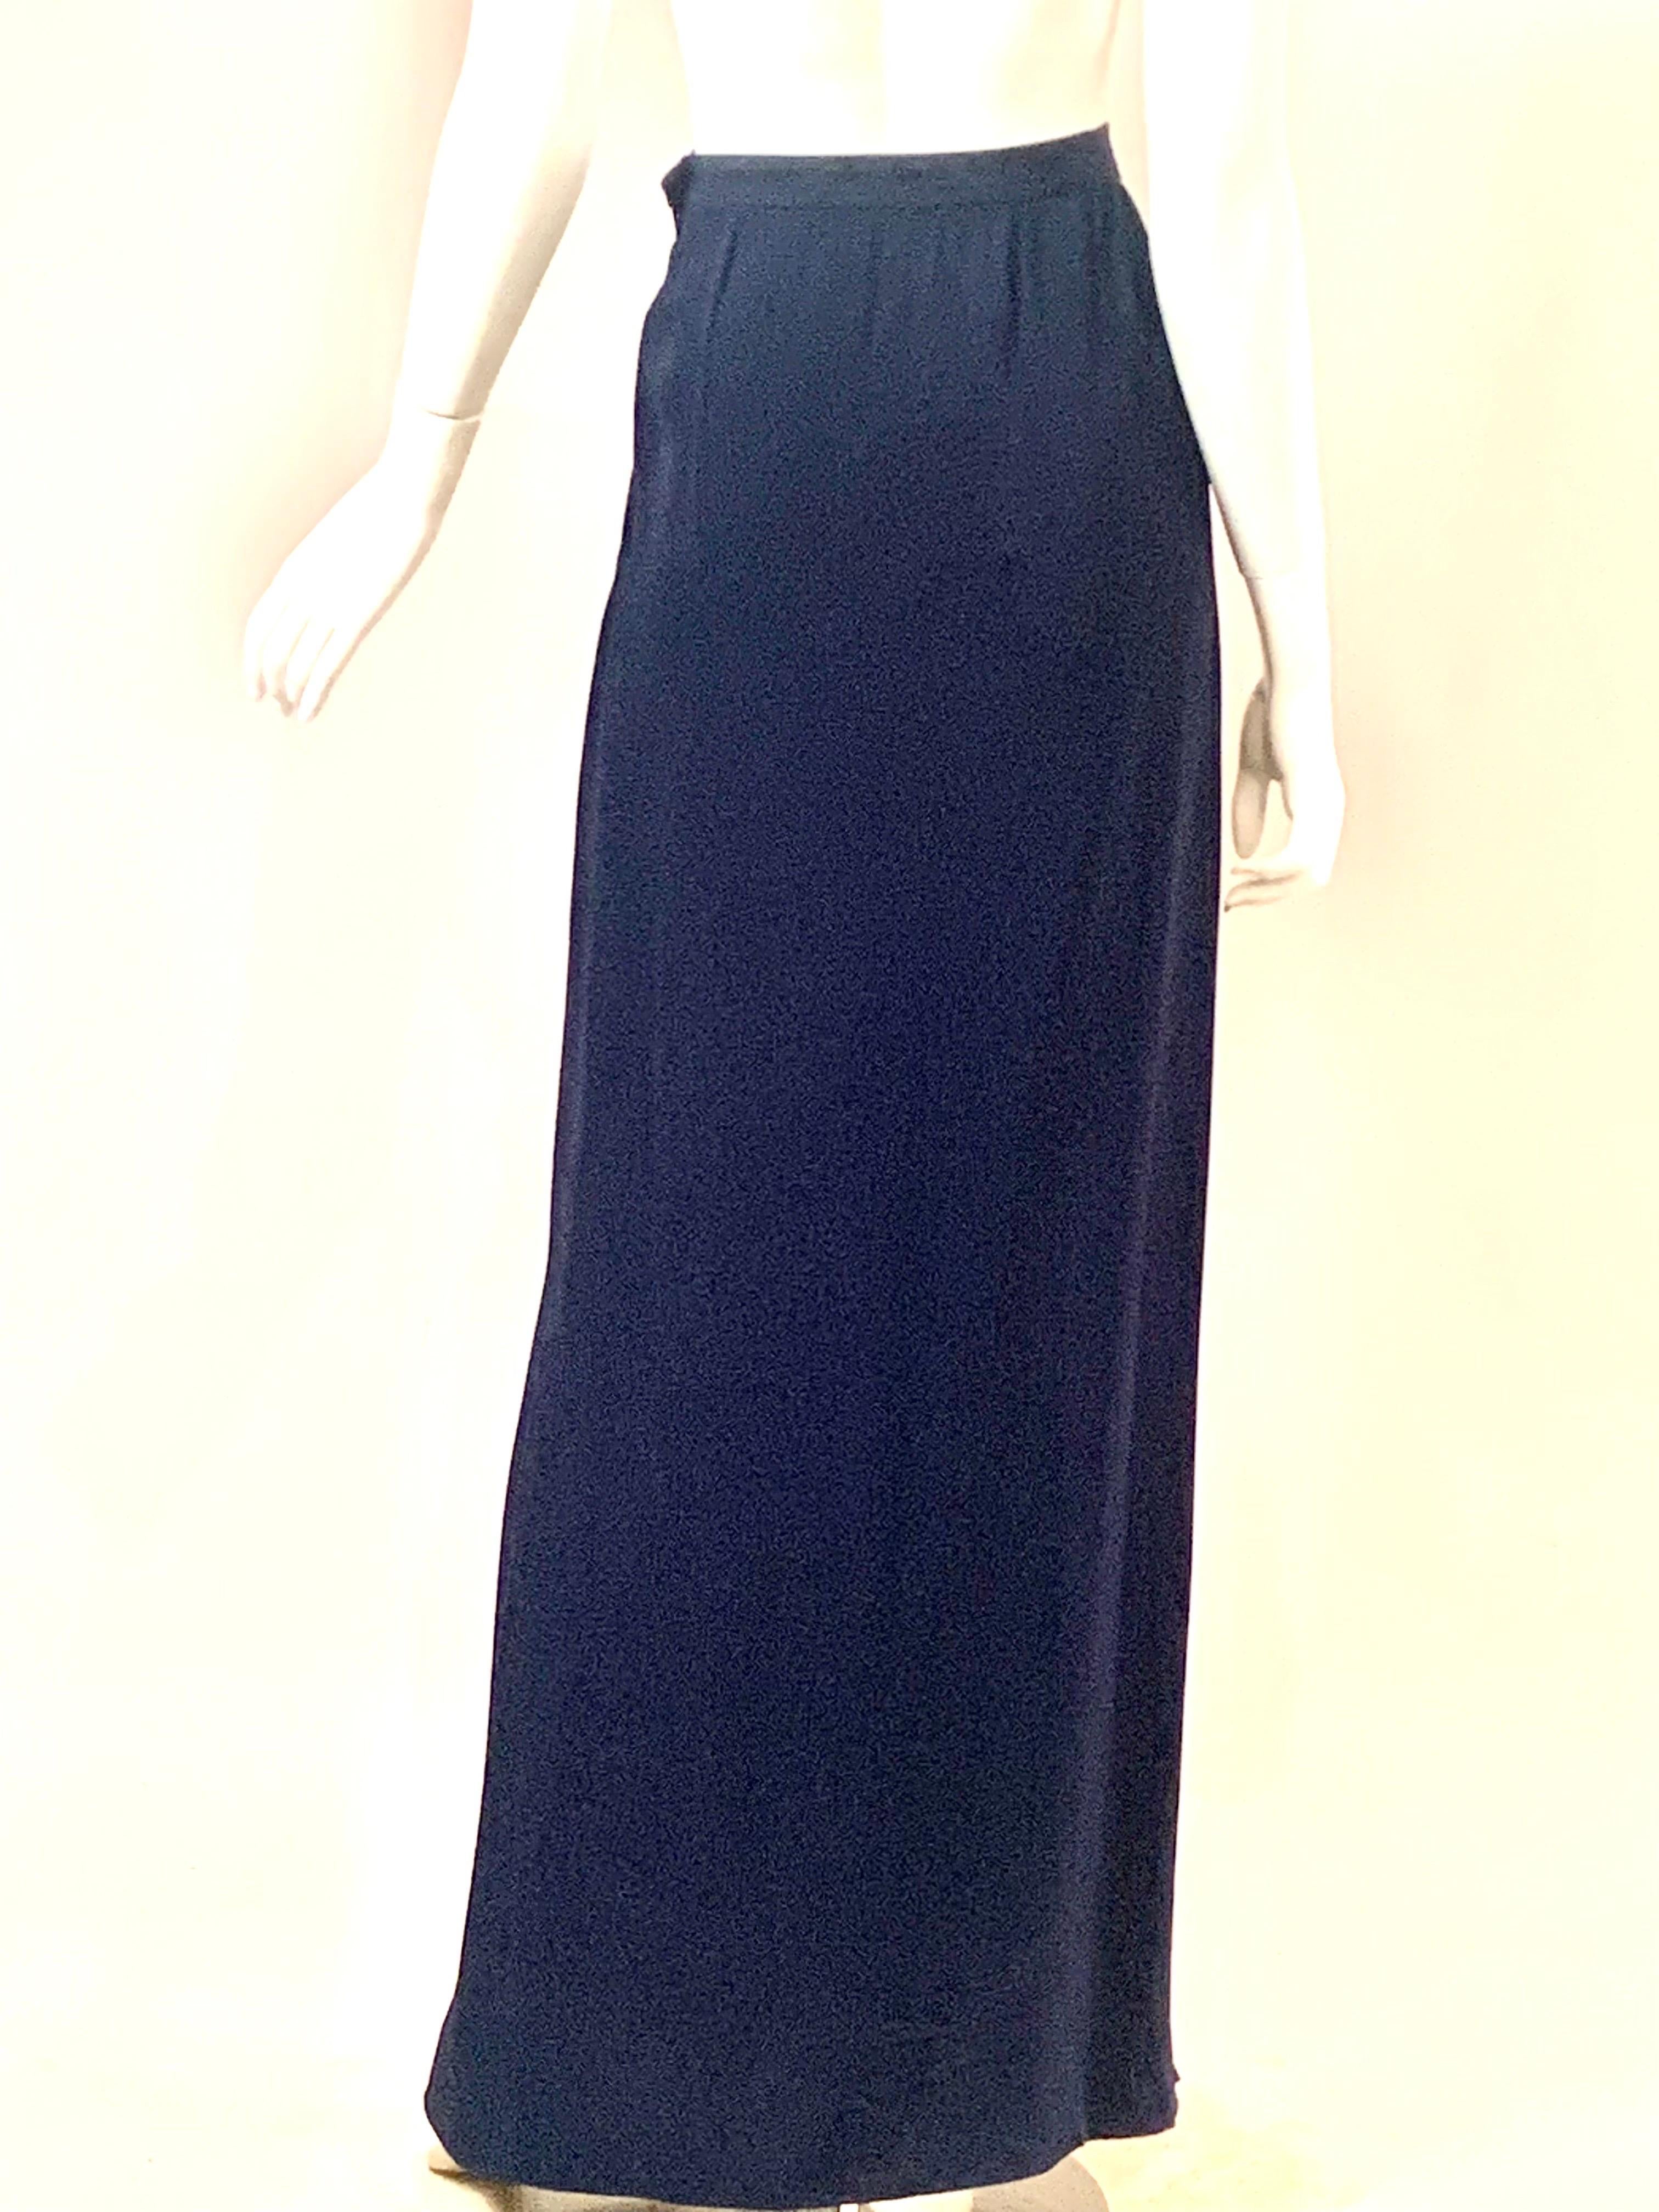 Yves Saint Laurent Navy Blue Long Skirt with Original Tags Never Worn For Sale 1